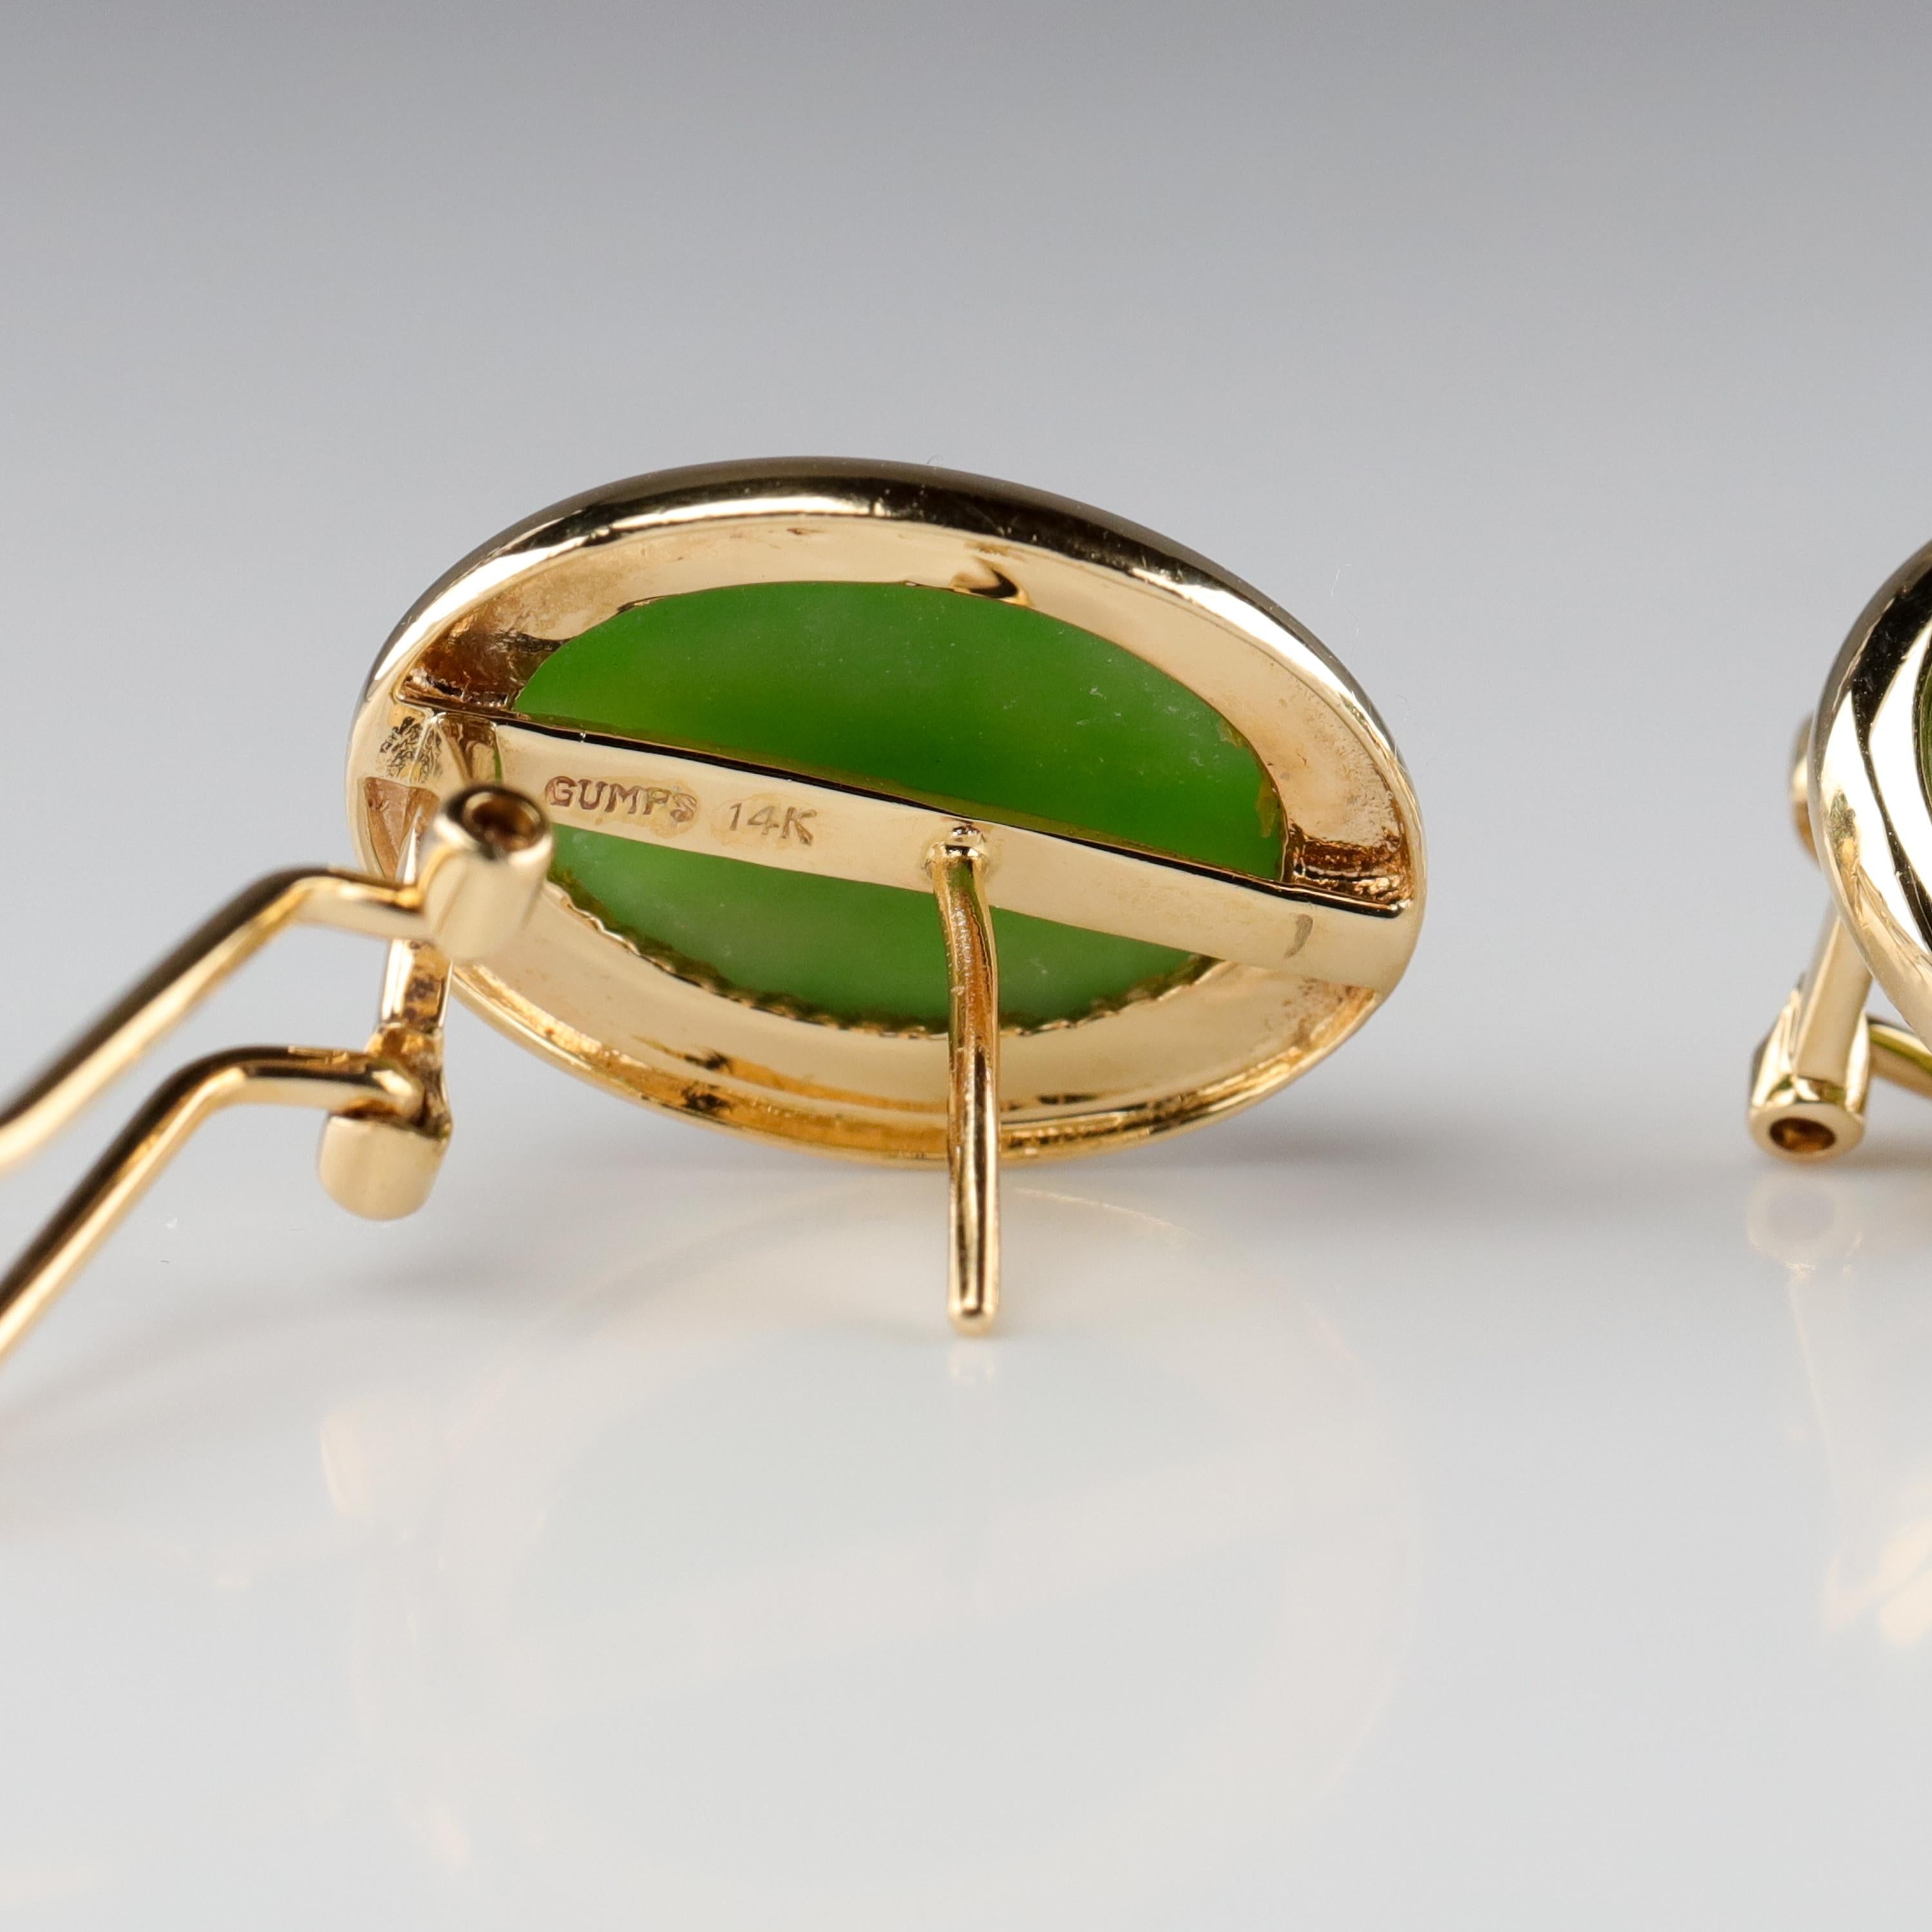 These classic circa 1990s gemmy green nephrite jade earrings were created in the 1990s by the iconic San Francisco retailer, Gump's. The name Gump's has long been associated with fine jewelry, especially natural and untreated jade. Each